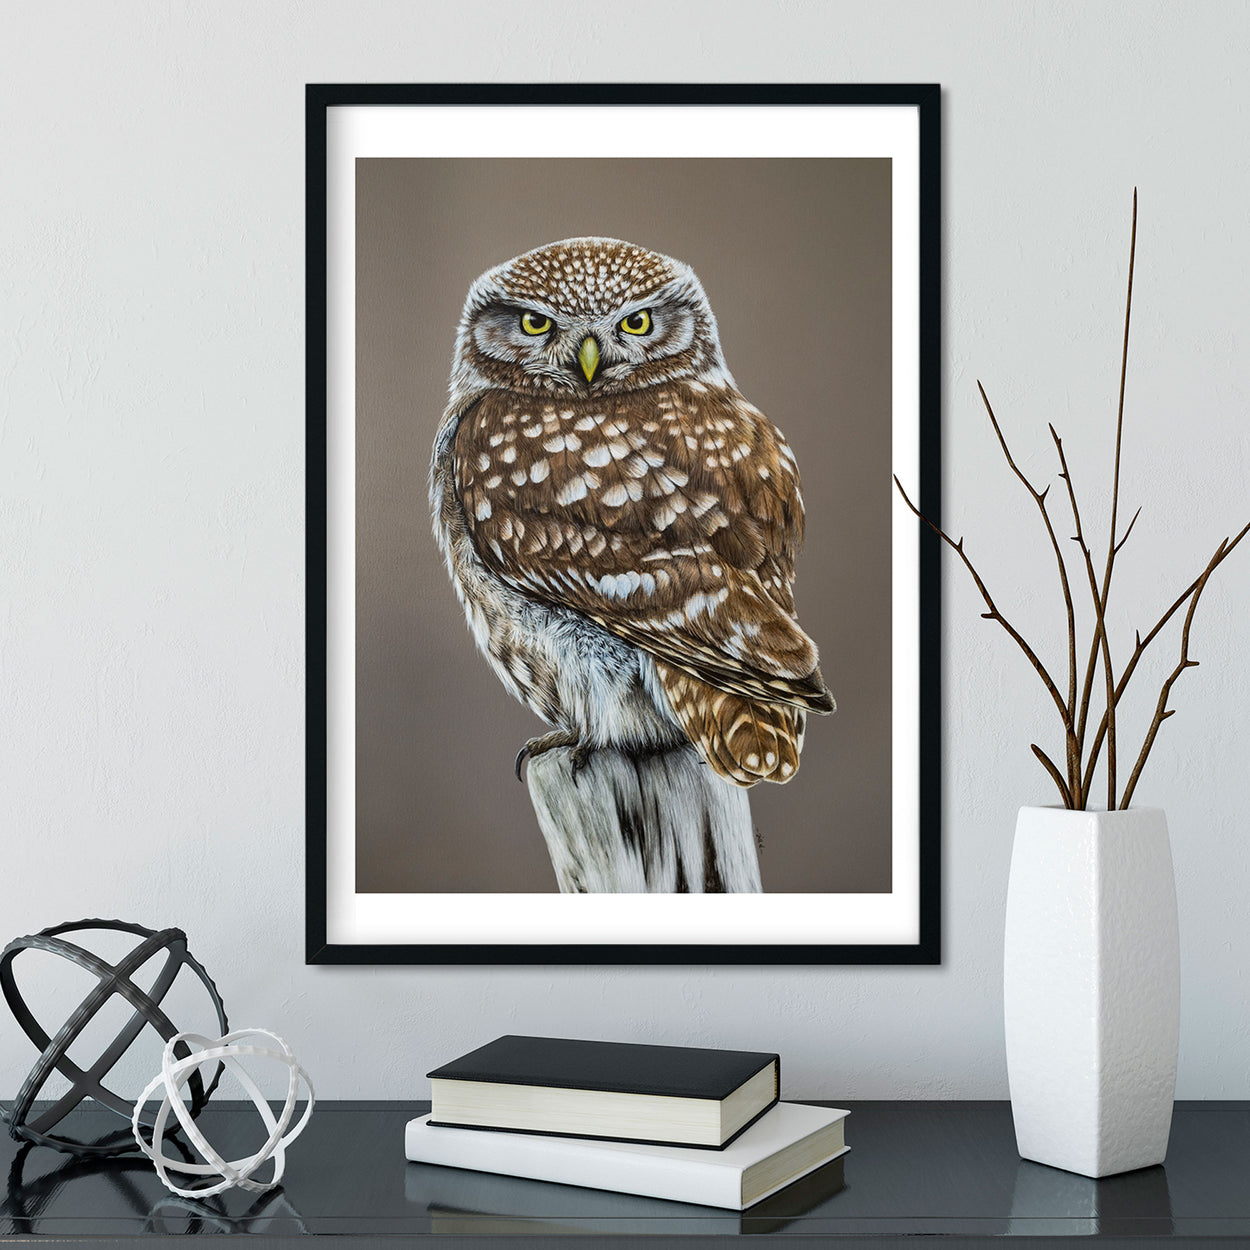 Painting of a little owl in a black frame on a white wall